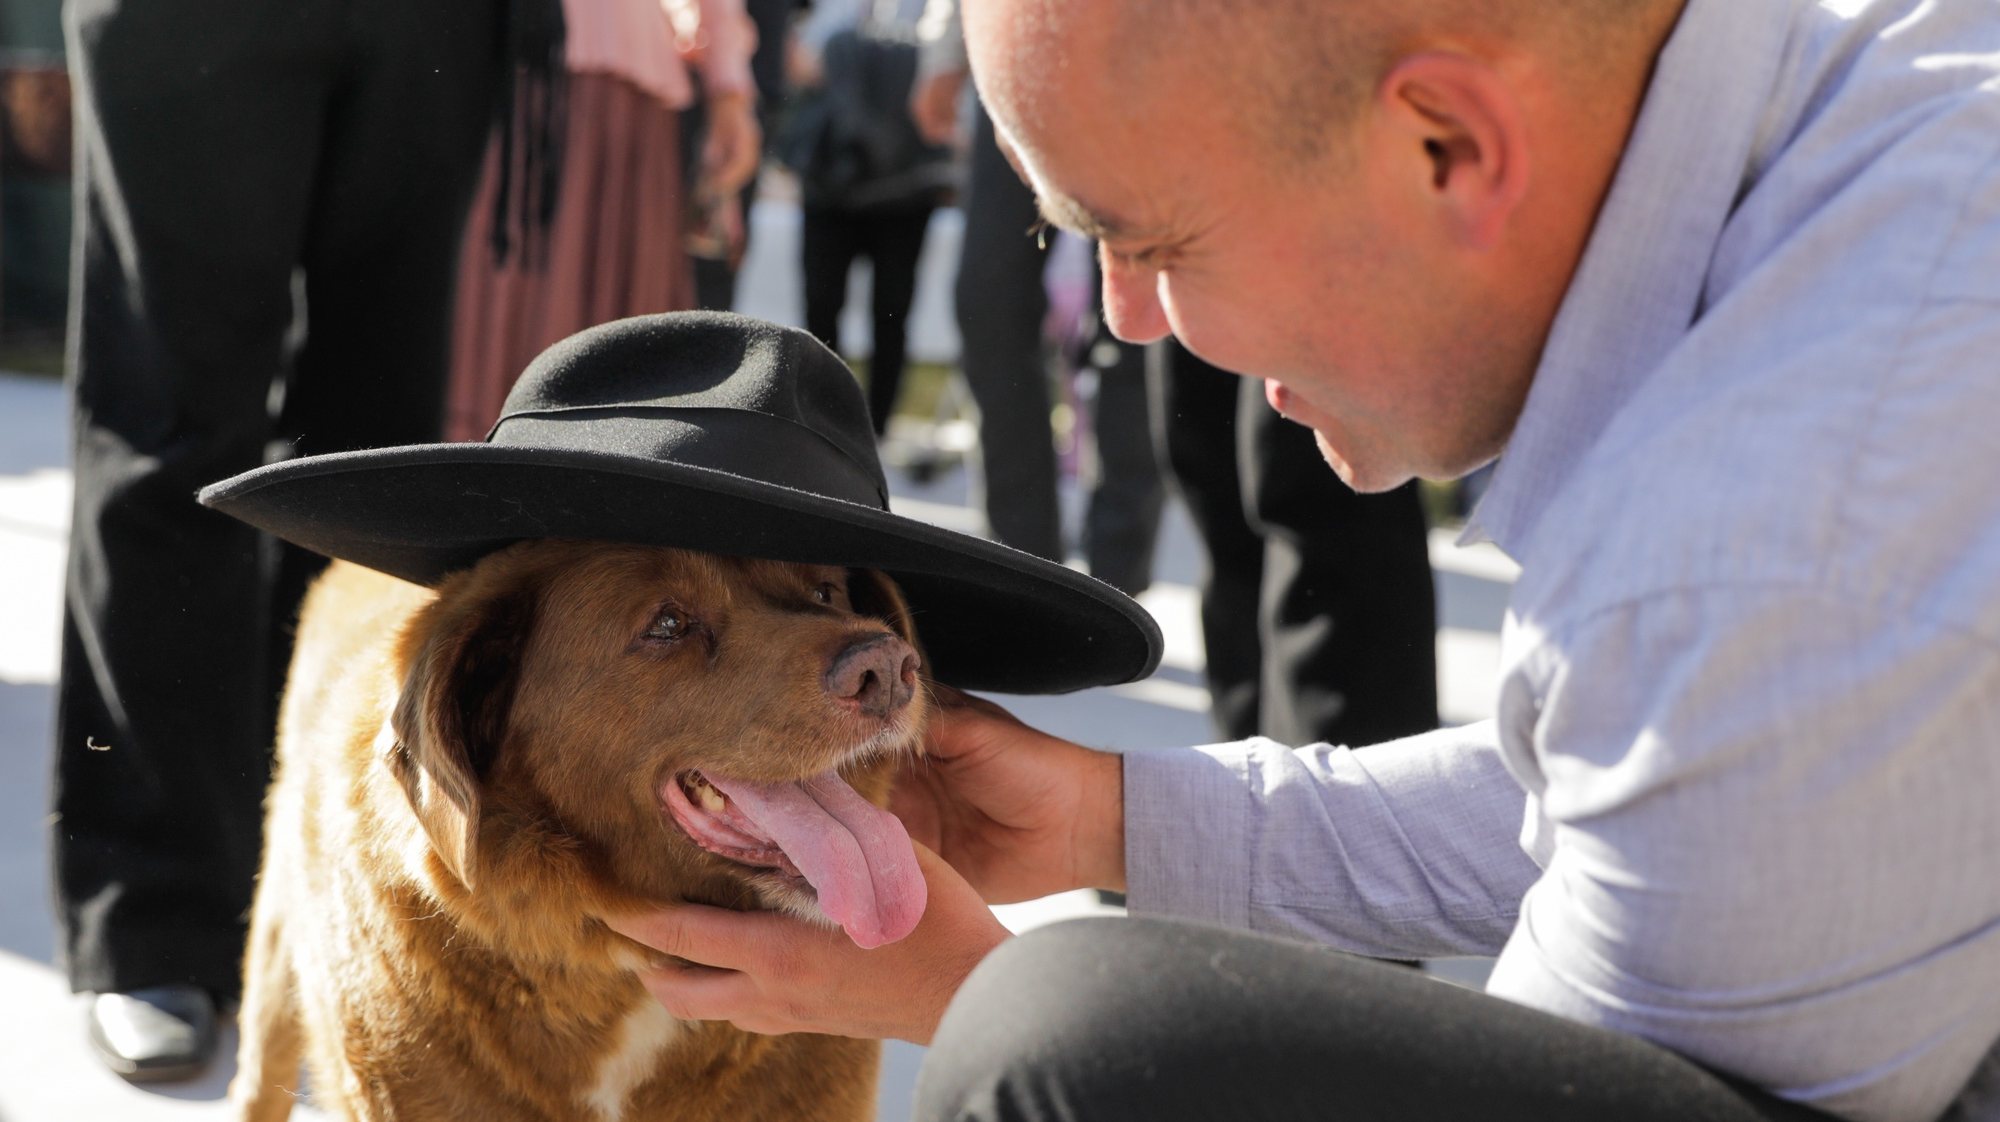 Leonel Costa plays with Bobi, a 31-year-old dog, that has celebrated his birthday as a celebrity in rural village of Conqueiros, in Leiria, central Portugal after being declared the world&#039;s oldest dog ever two months ago by Guinness World Records, Leiria, 13 May 2023. Bobi&#039;s owner kept him in secret as a child after his parents said they couldn&#039;t keep the litter of new pups. His owners attribute his longevity to his diet of human food. PAULO CUNHA/LUSA